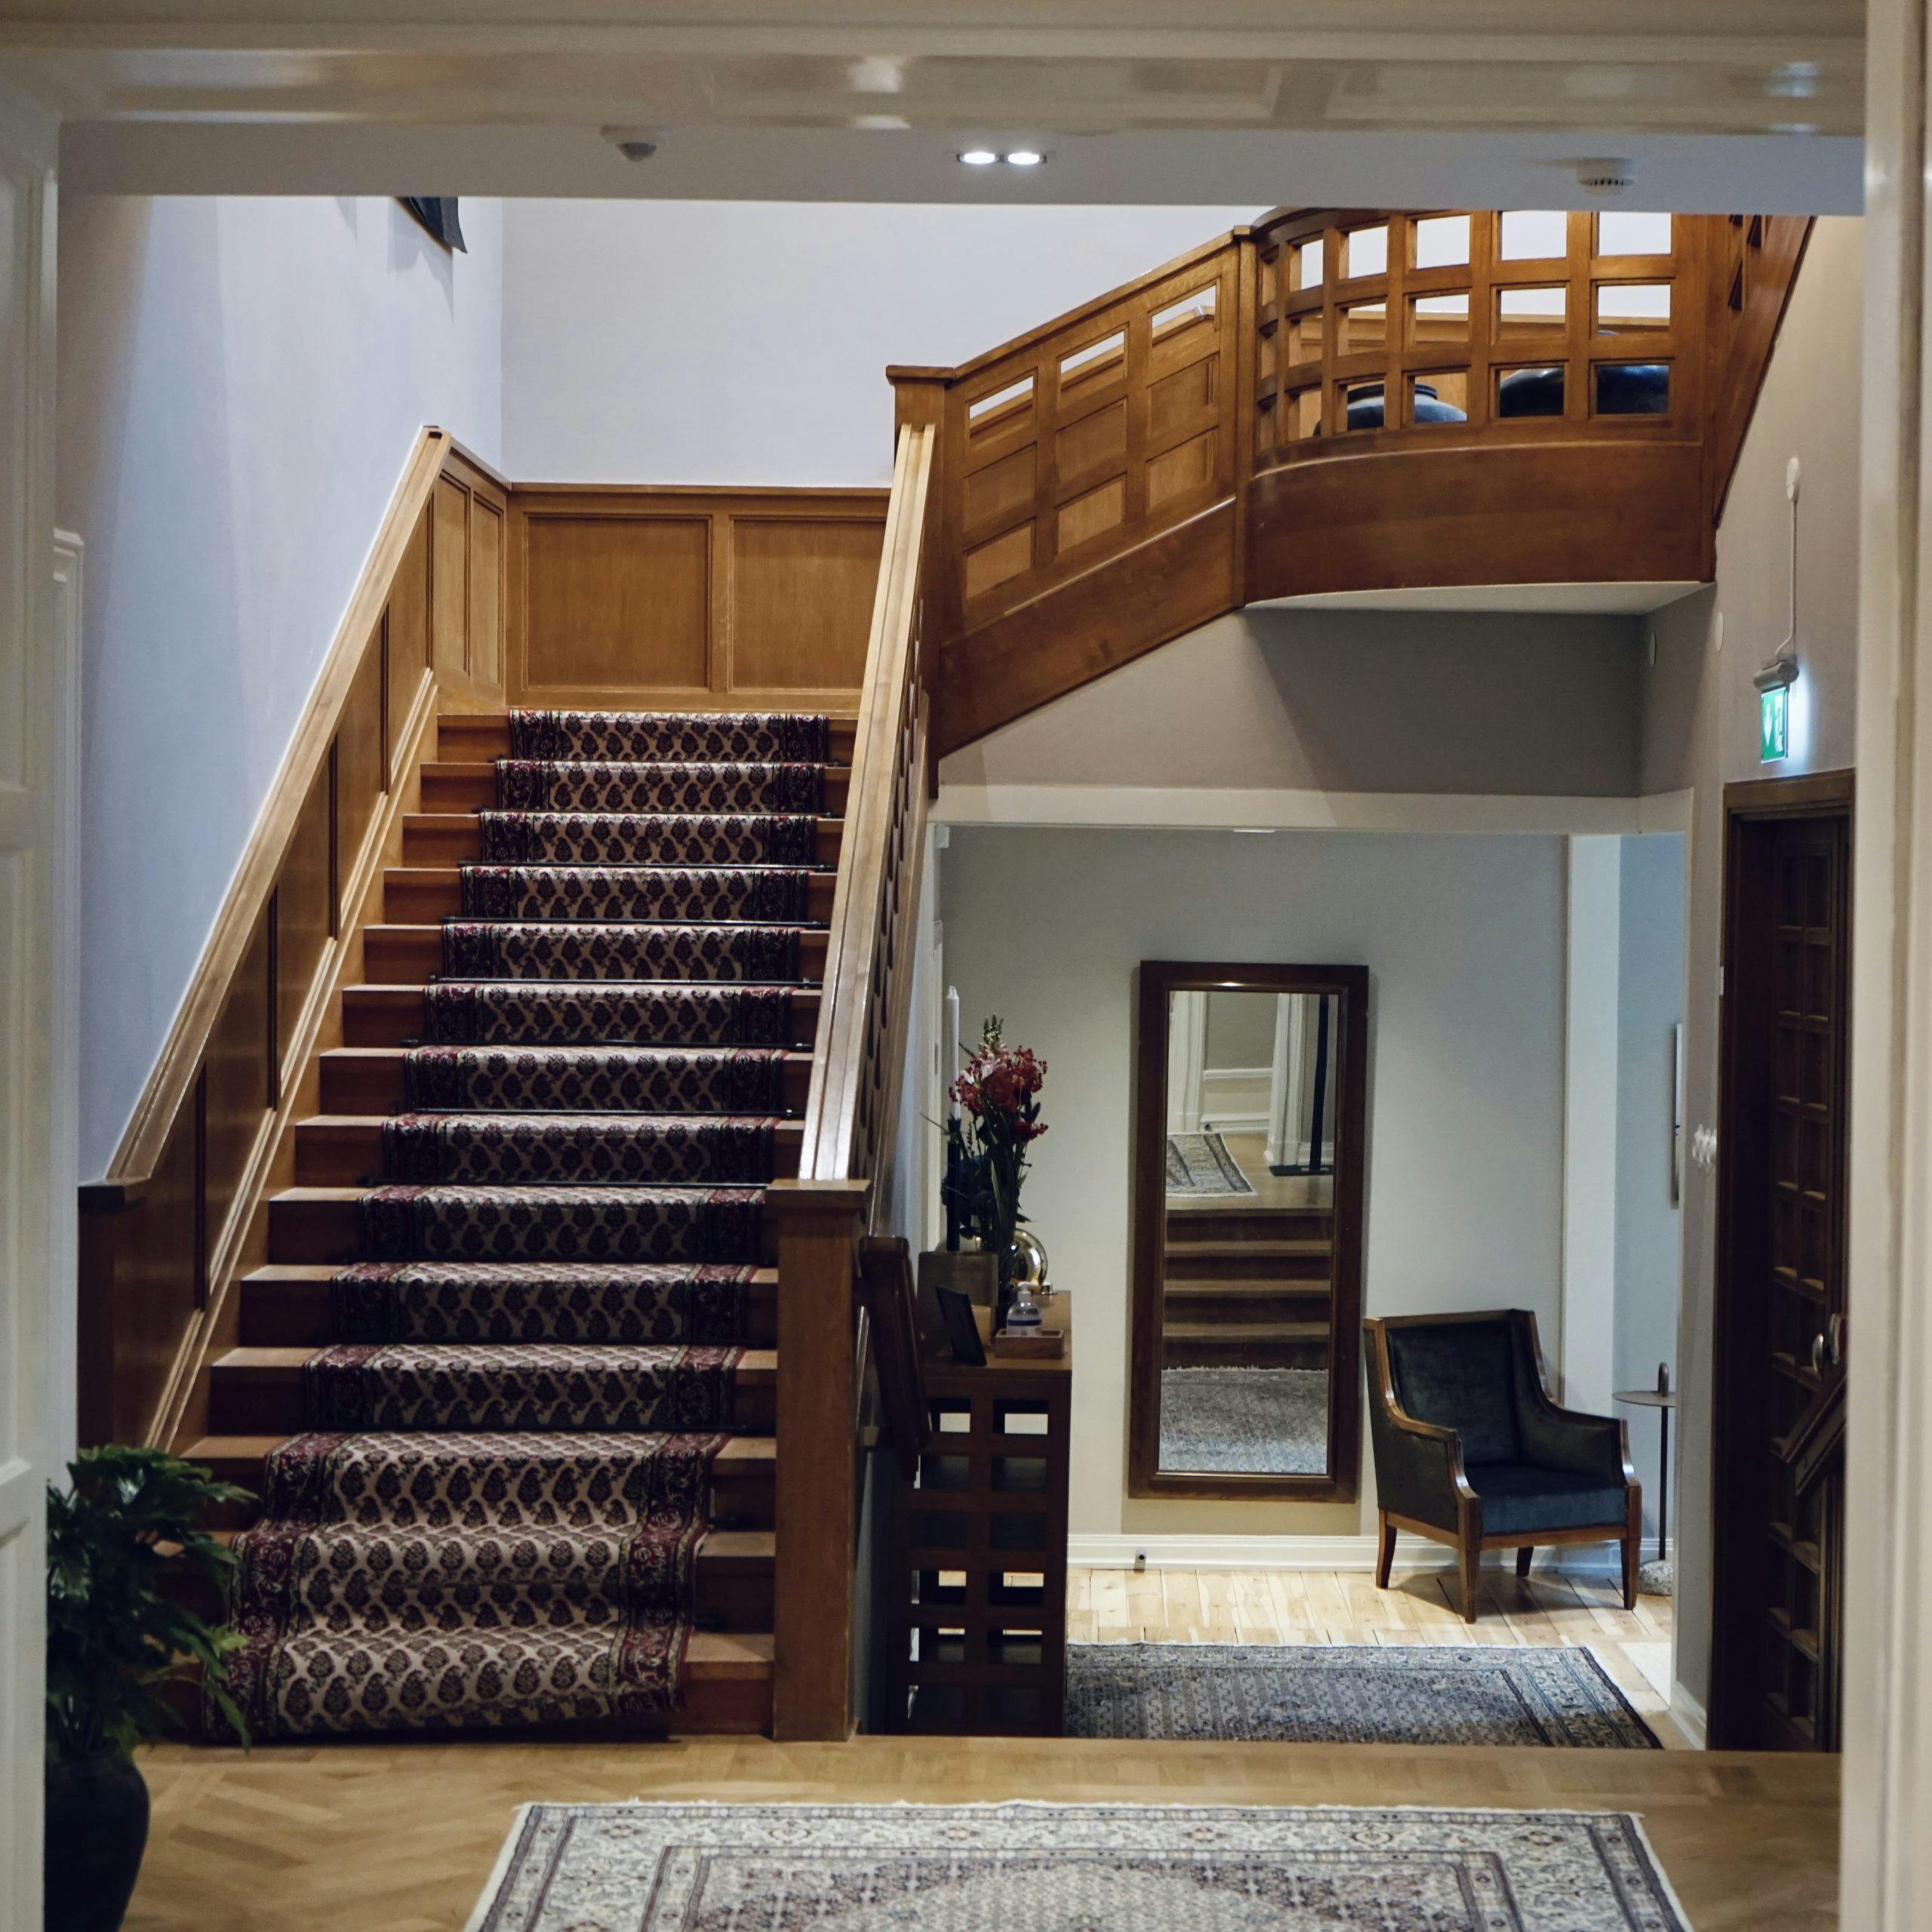 Staircase and hallway at Consid's office in Linköping.